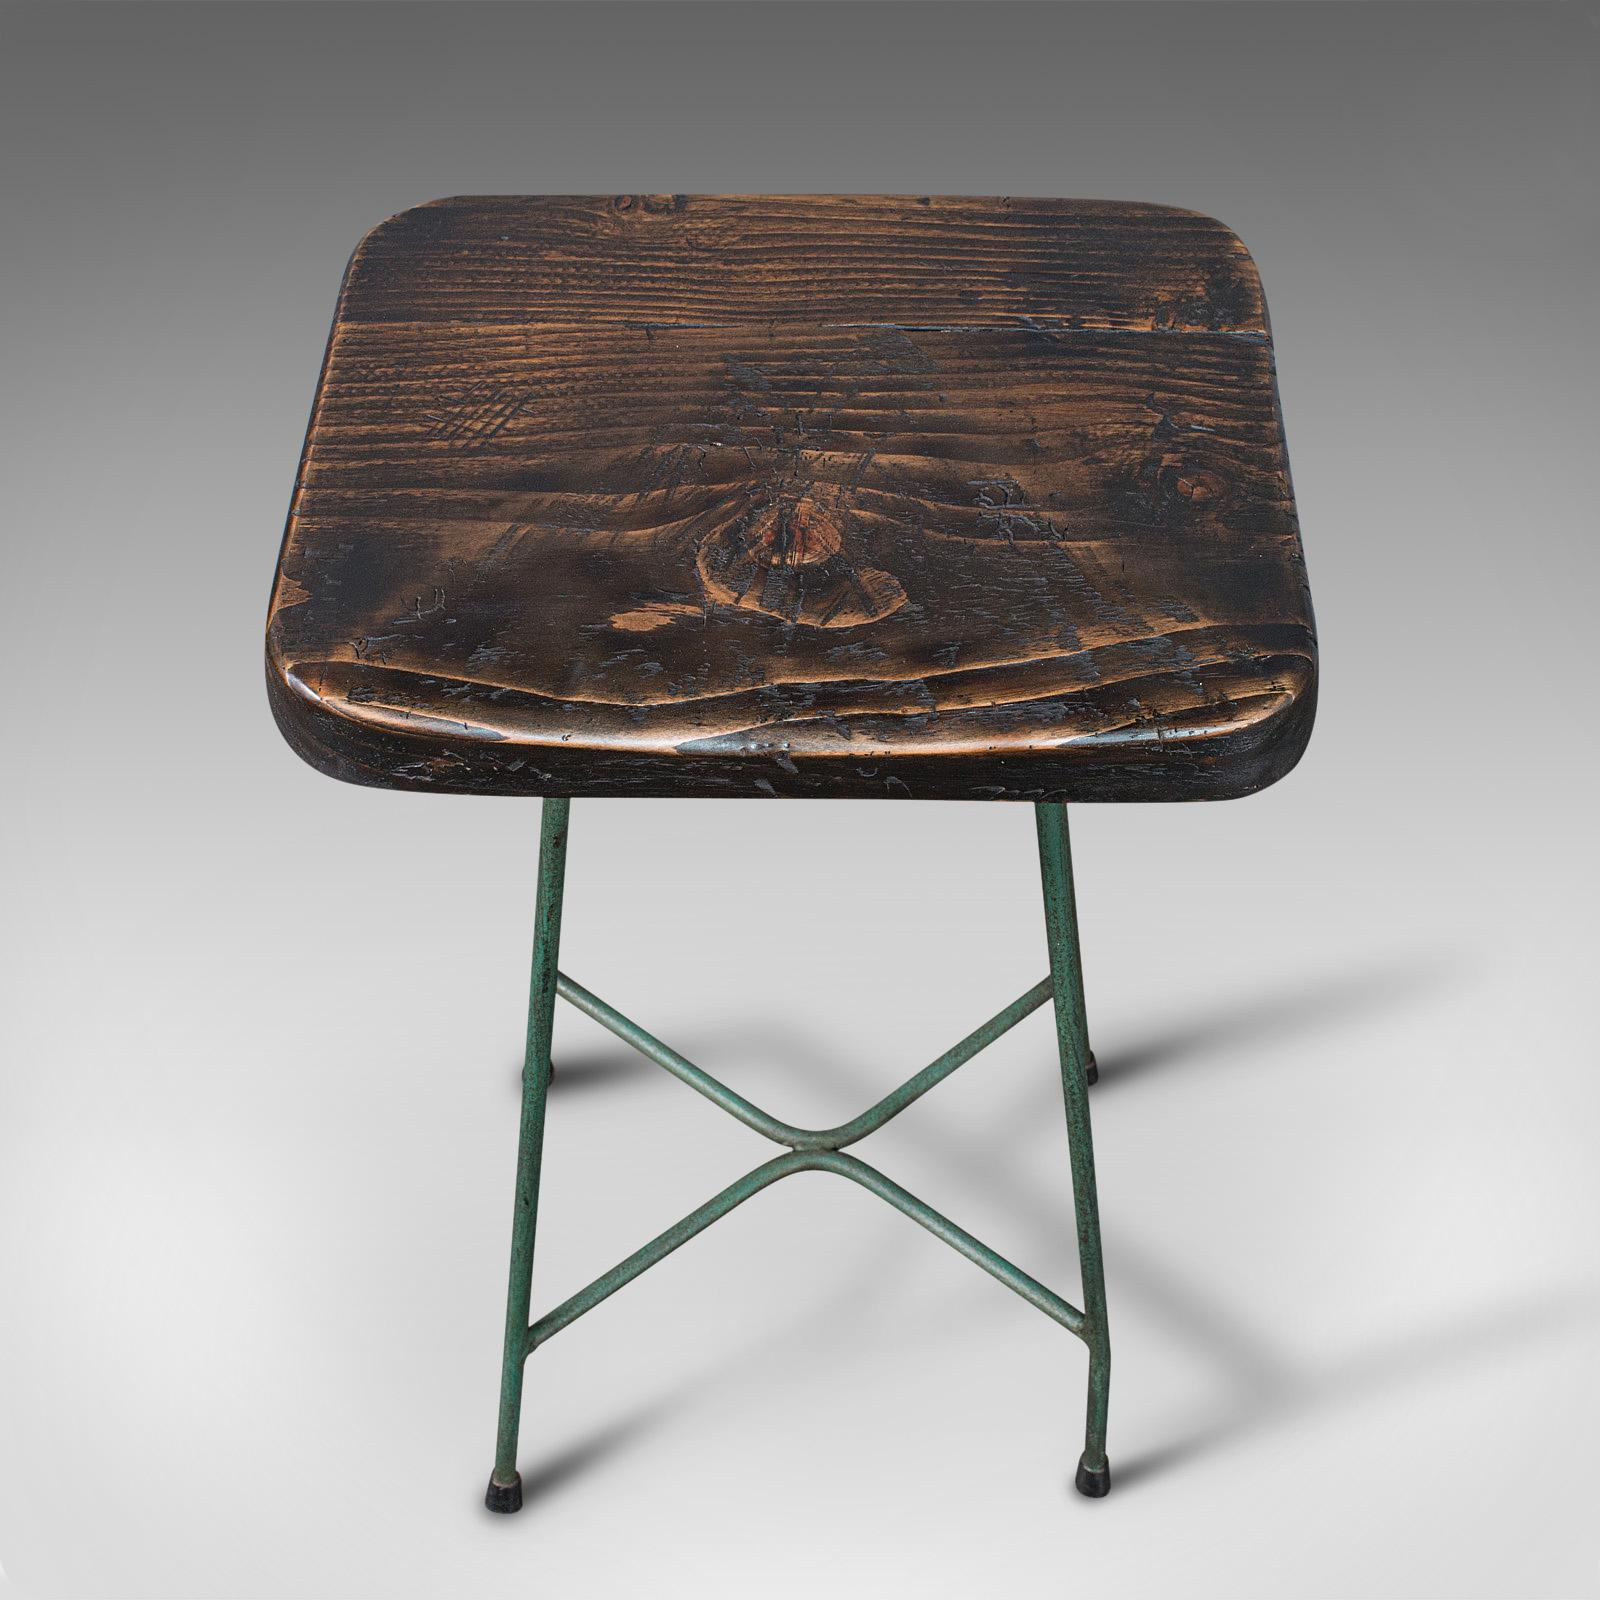 20th Century Vintage Munitions Factory Stool, English, Pine, Industrial Taste, Lab Seat, 1940 For Sale